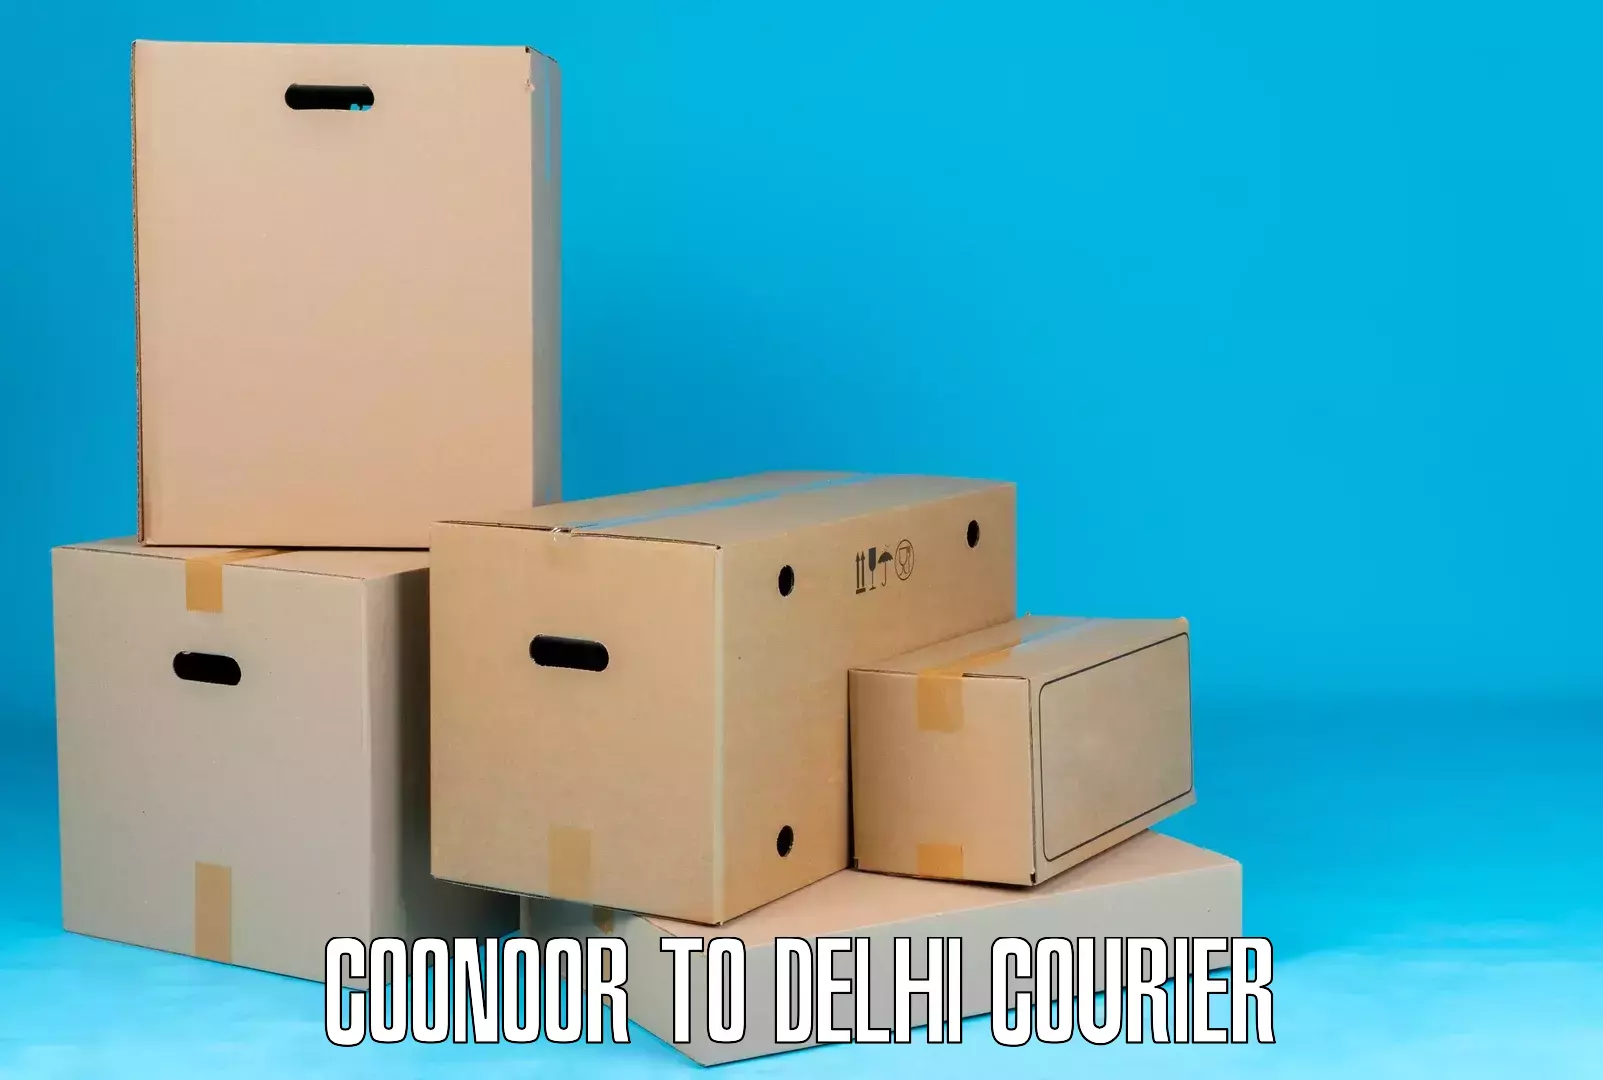 Express logistics service Coonoor to NCR